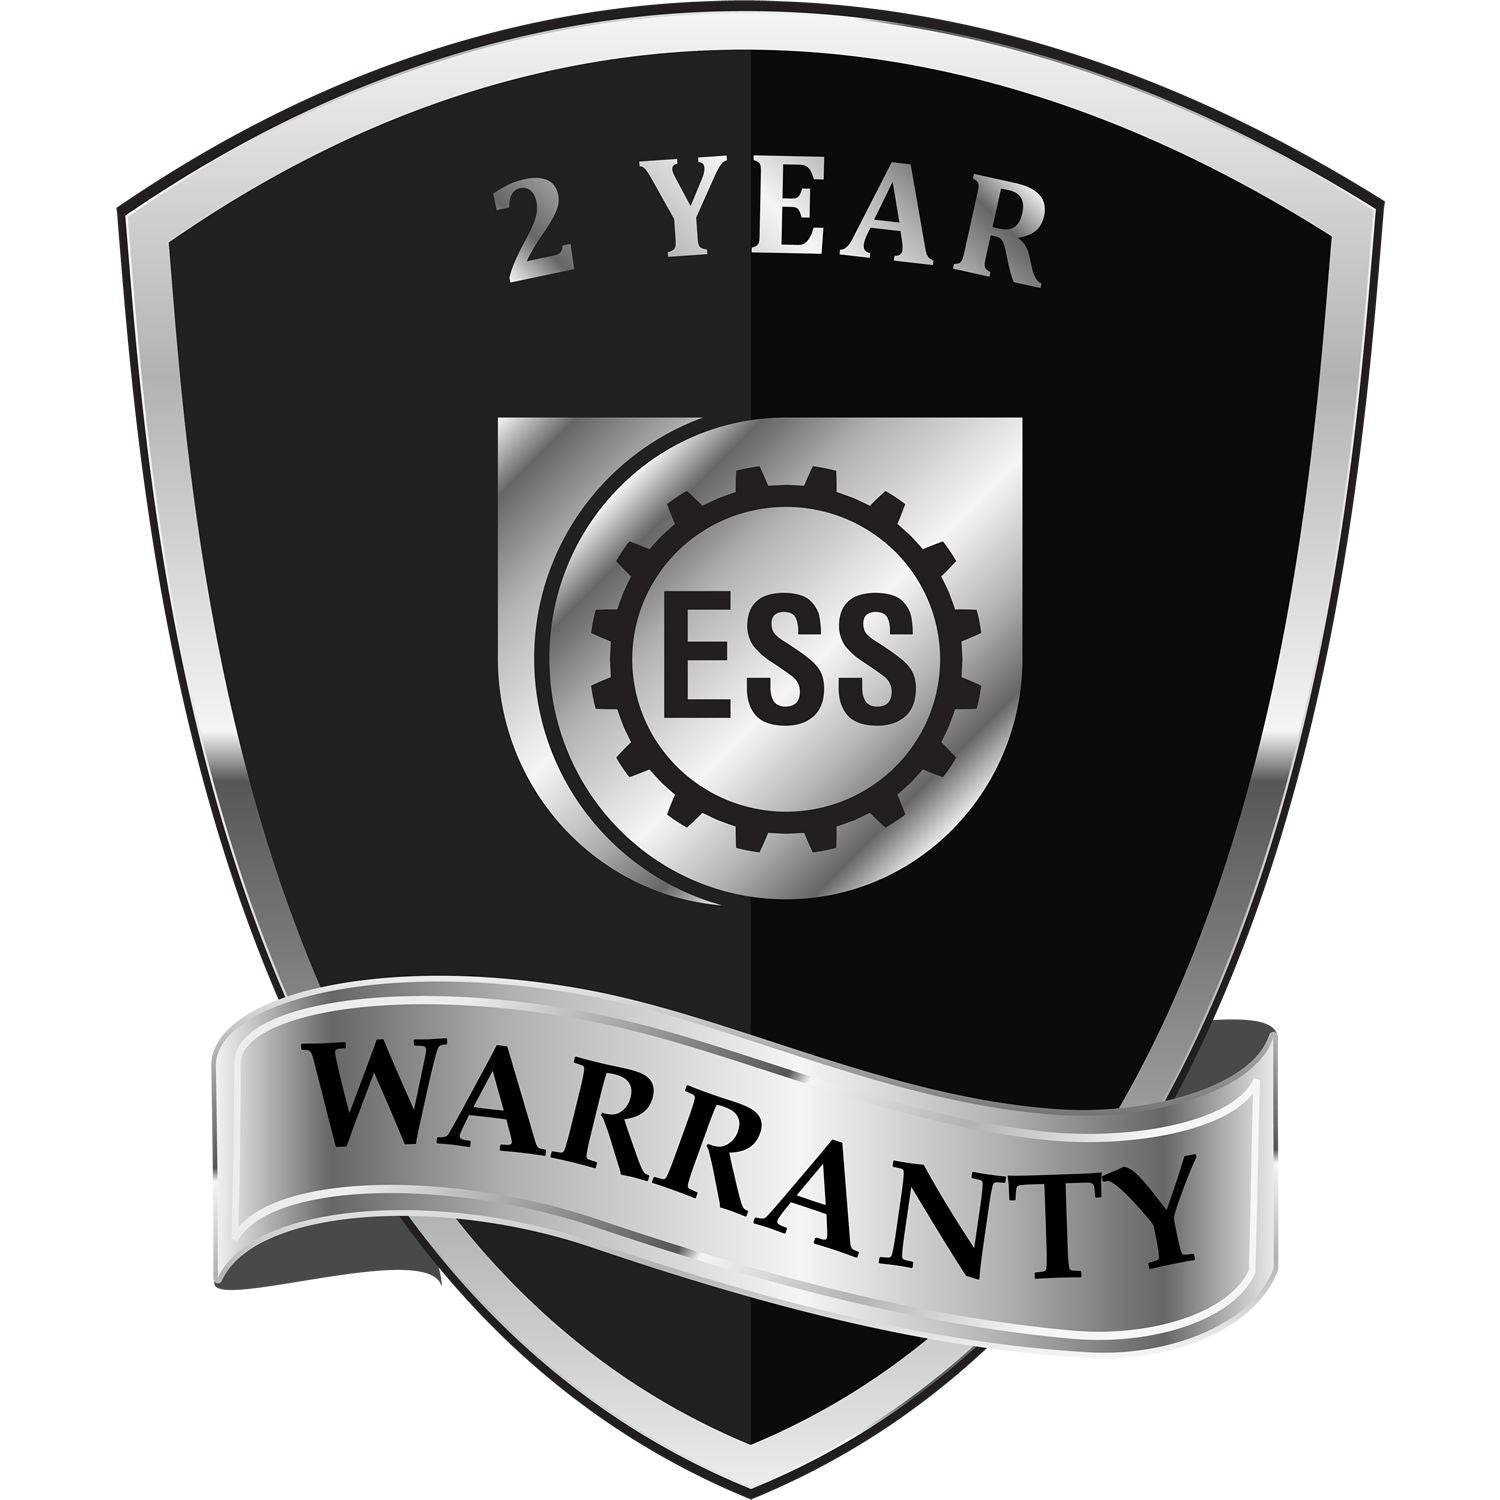 A badge or emblem showing a warranty icon for the Arkansas Desk Architect Embossing Seal